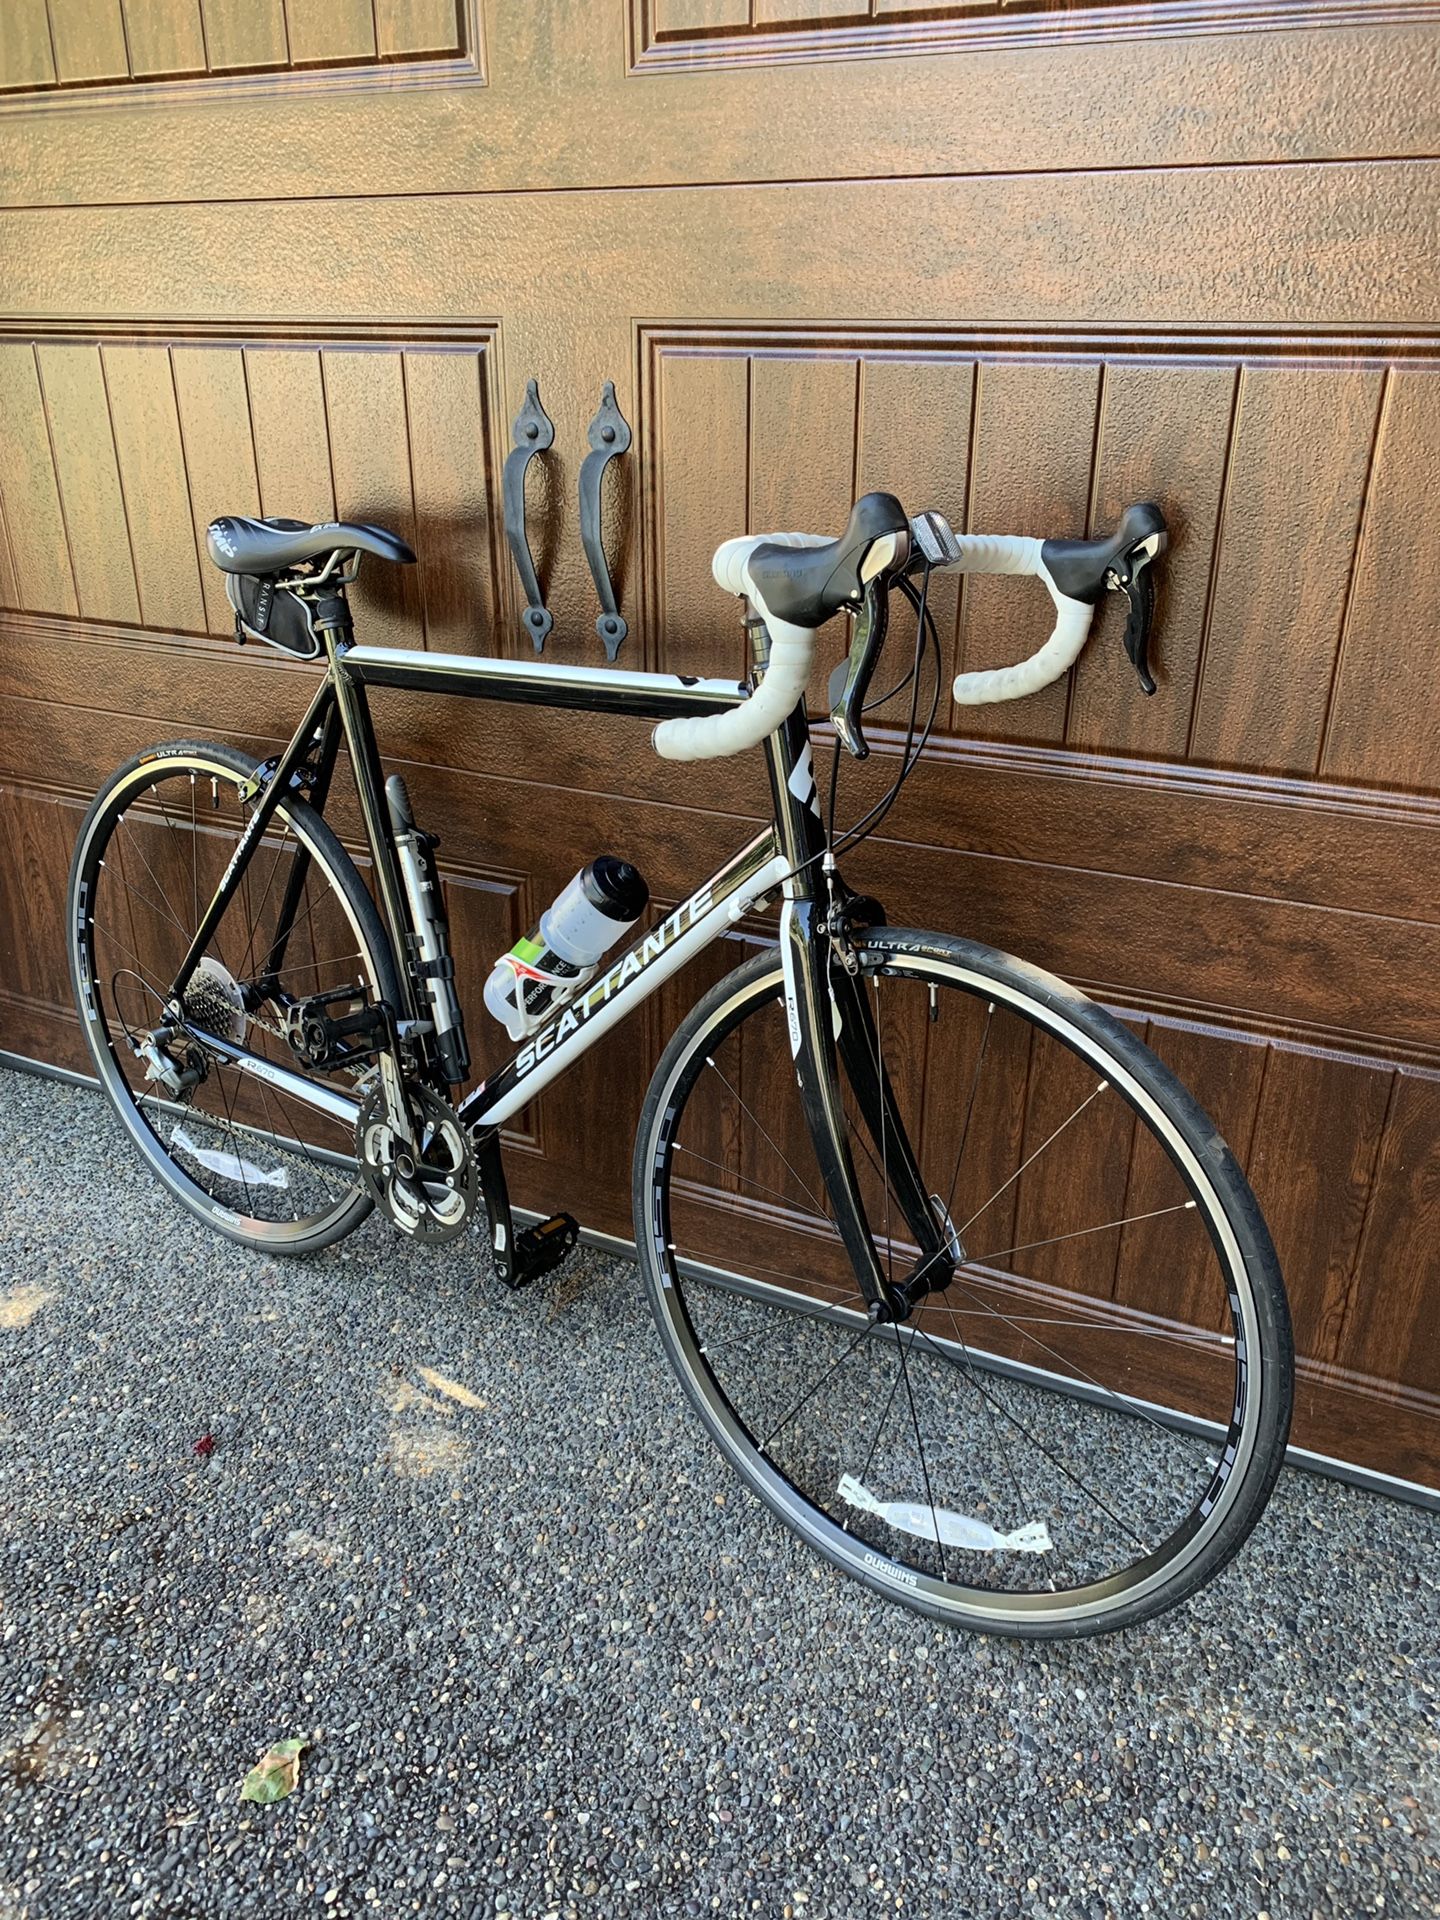 Scattante road bike like new in excellent condition. Been hanging in my garage for a couple years and needs a new home